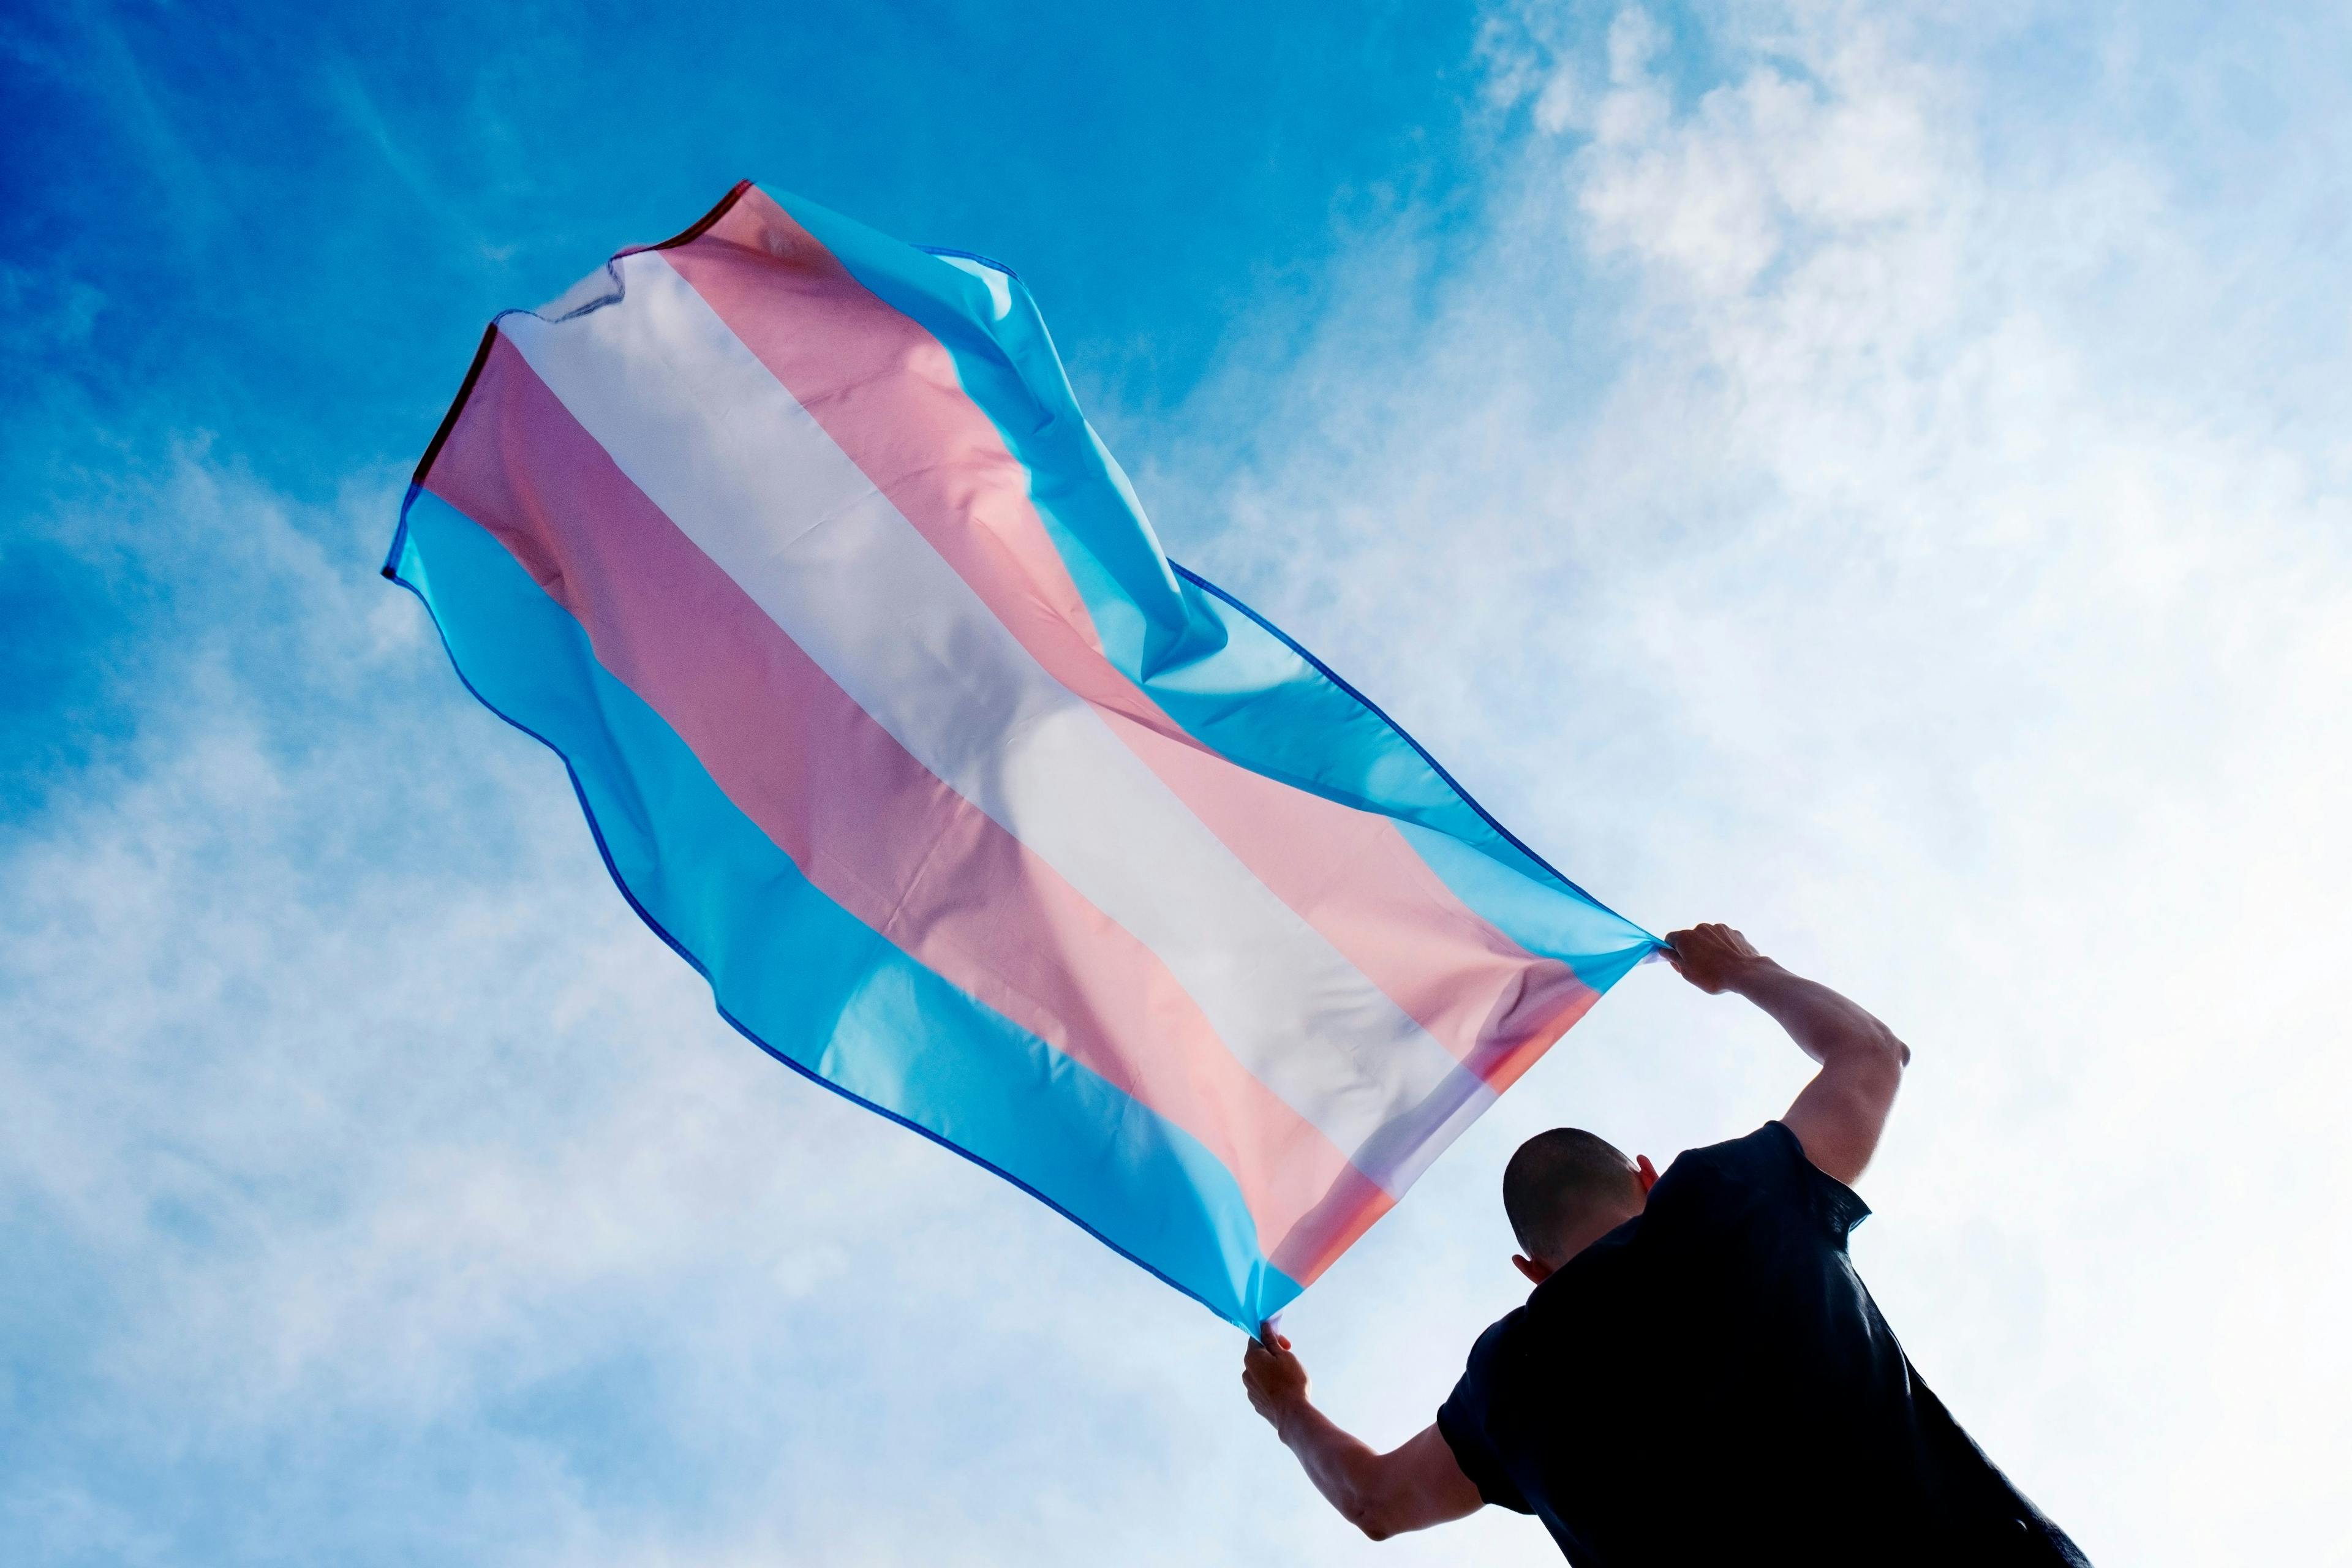 Considerations to Best Serve Transgender Patients Seeking Aesthetic Care